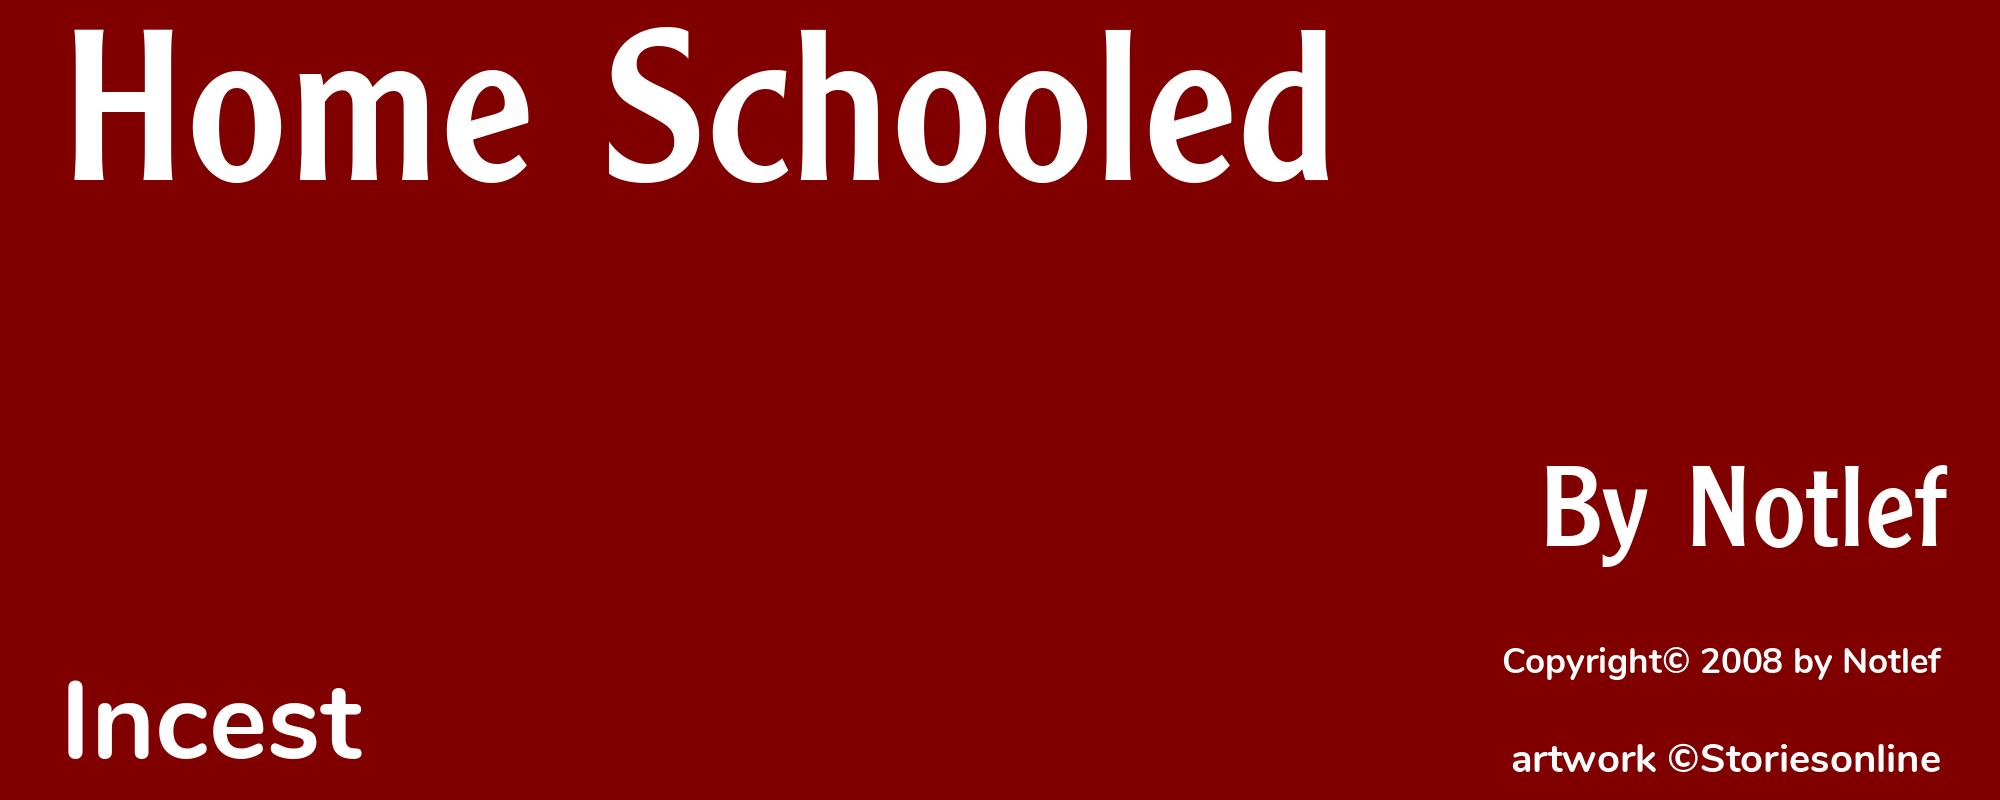 Home Schooled - Cover